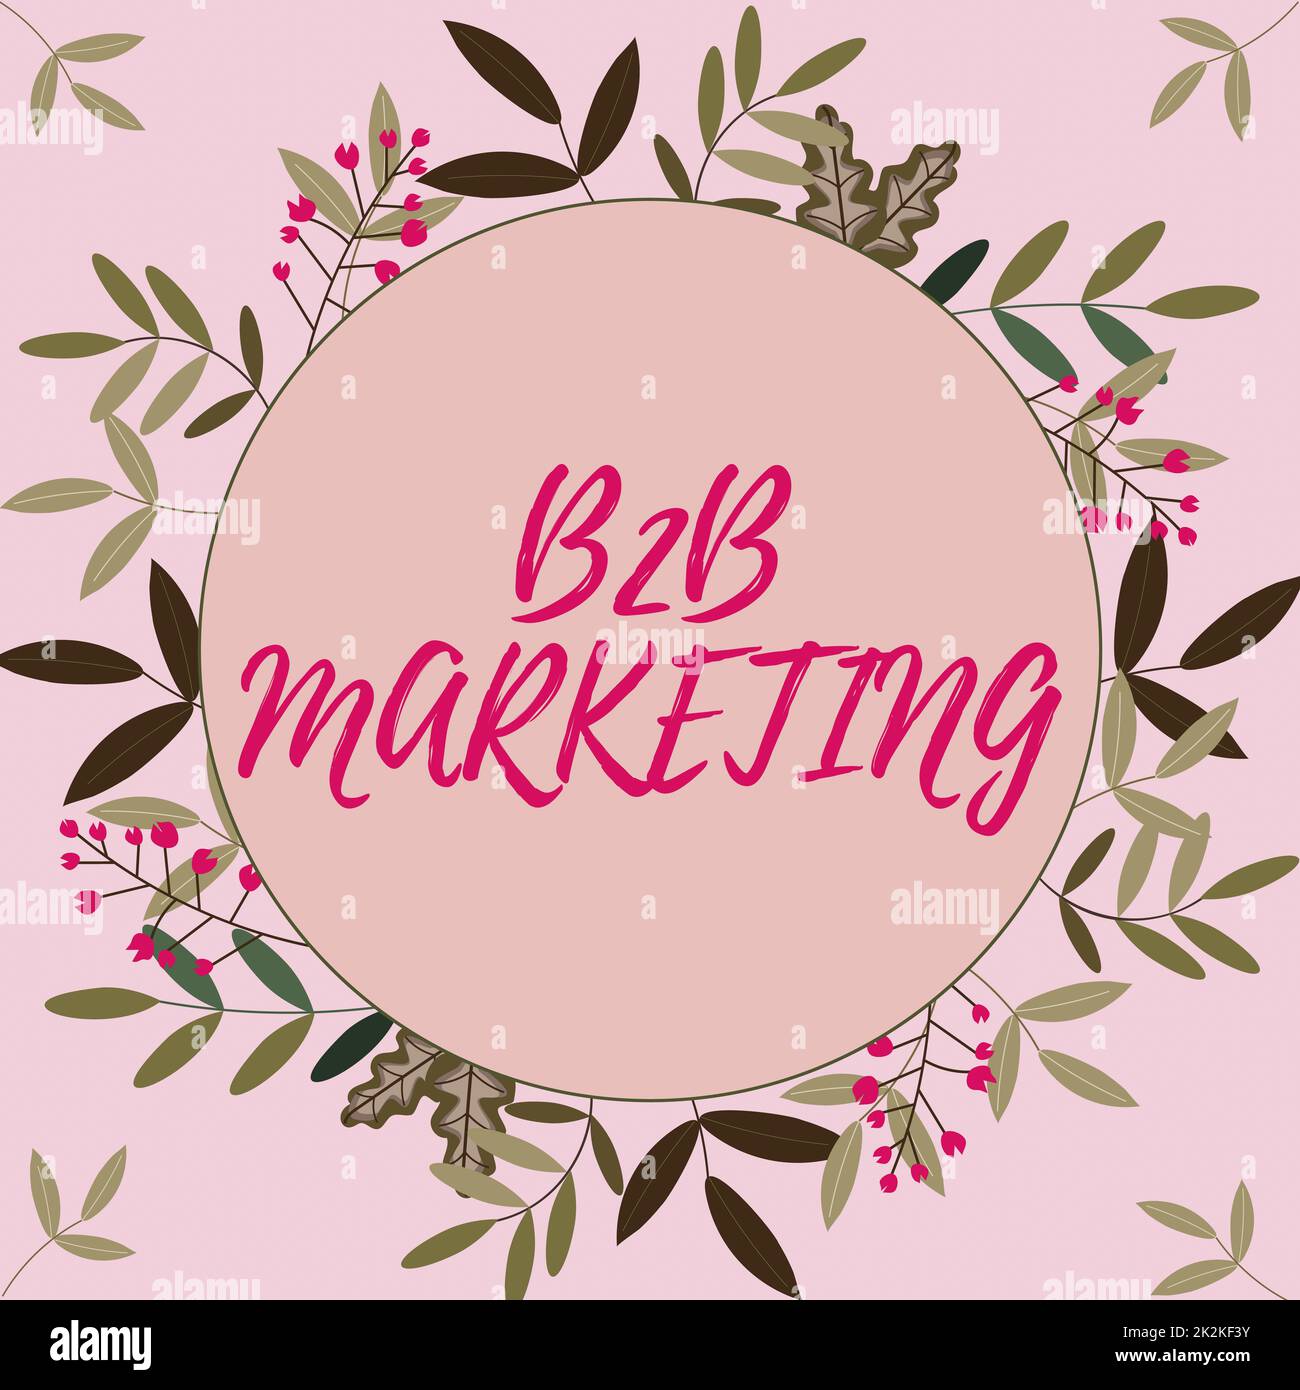 Conceptual caption B2B Marketing. Business concept Partnership Companies Supply Chain Merger Leads Resell Frame Decorated With Colorful Flowers And Foliage Arranged Harmoniously. Stock Photo